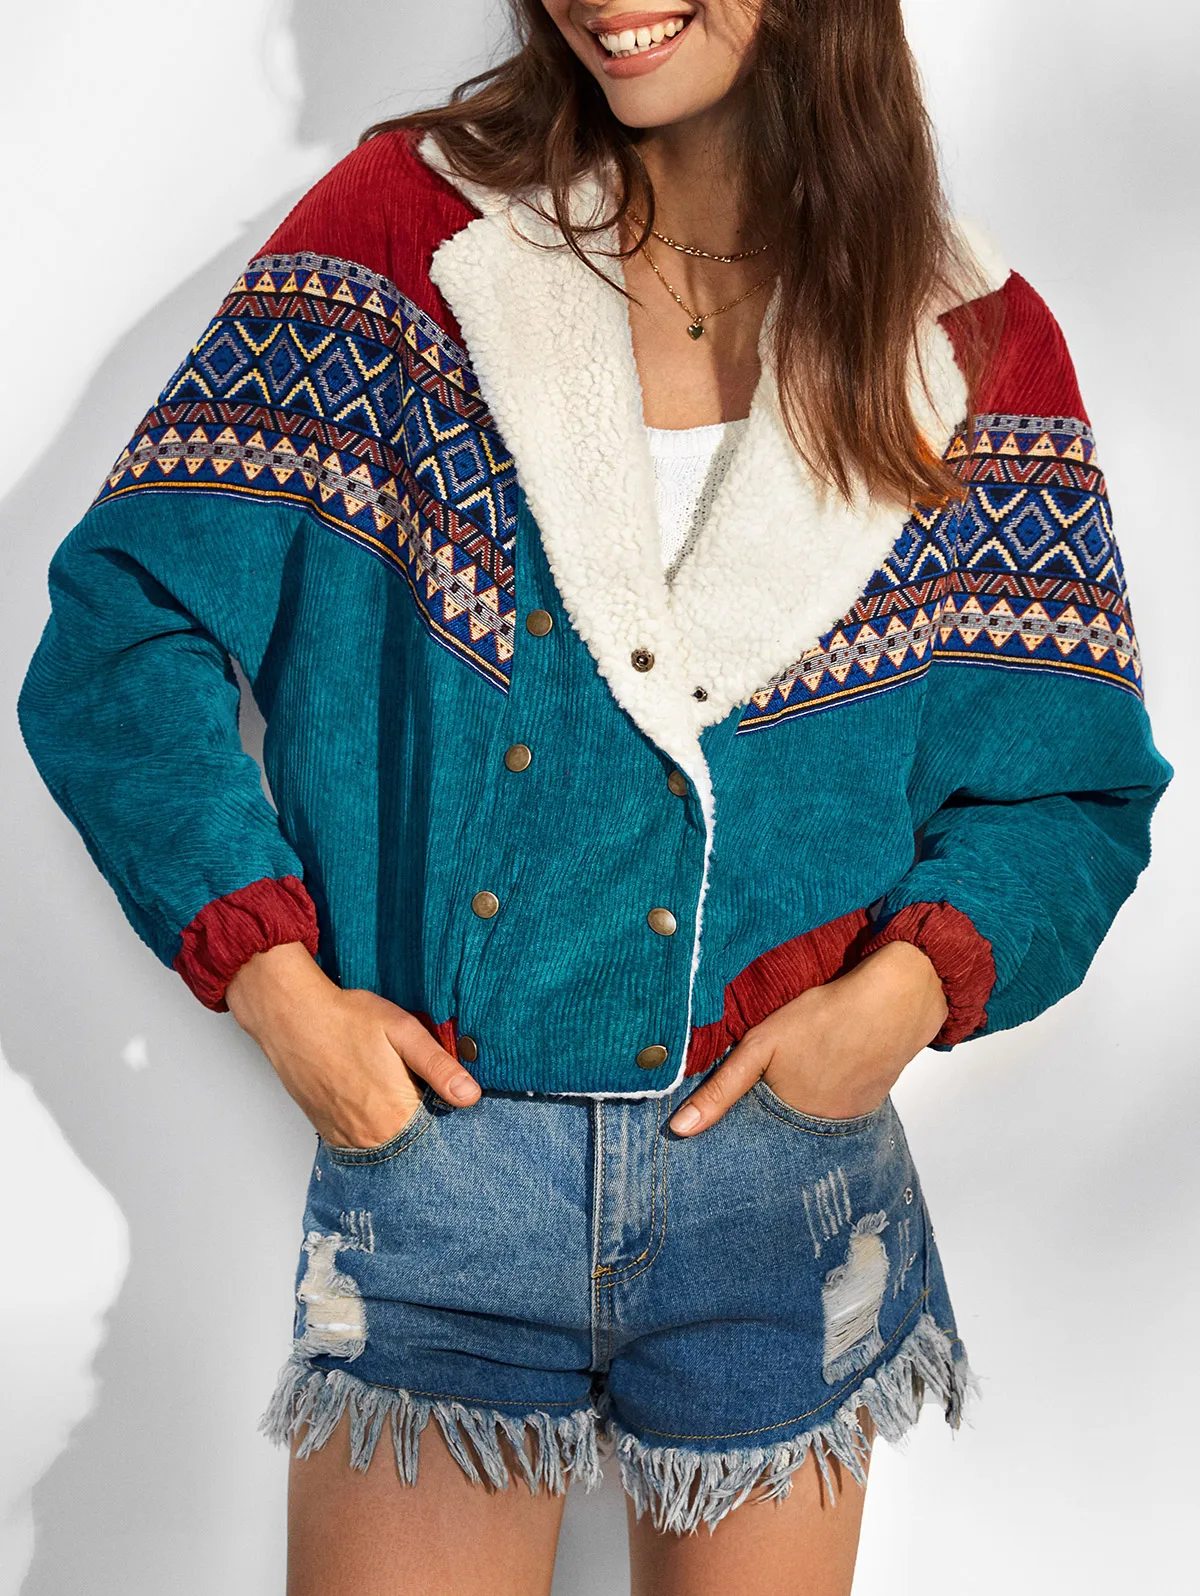 

ZAFUL Double Breasted Tribal Print Faux Shearling Collar Corduroy Jacket Ethnic Aztec Printed Coat Spring Autumn Clothes Women